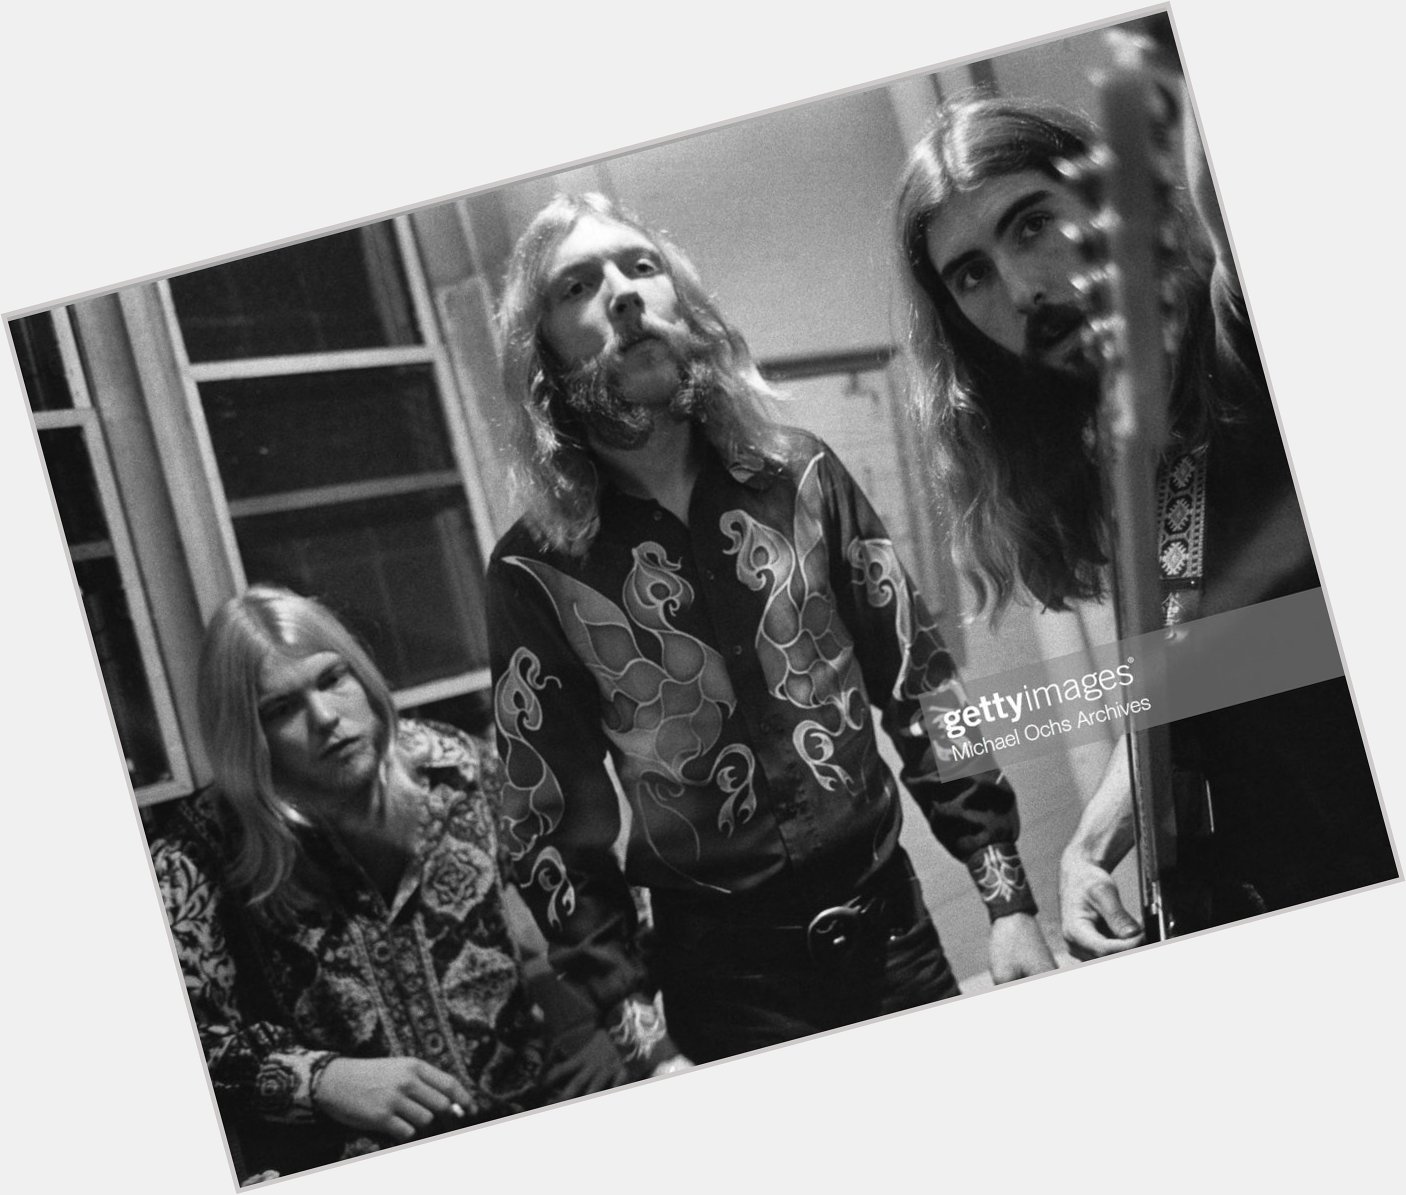   Also Happy Birthday to the late, great Duane Allman 